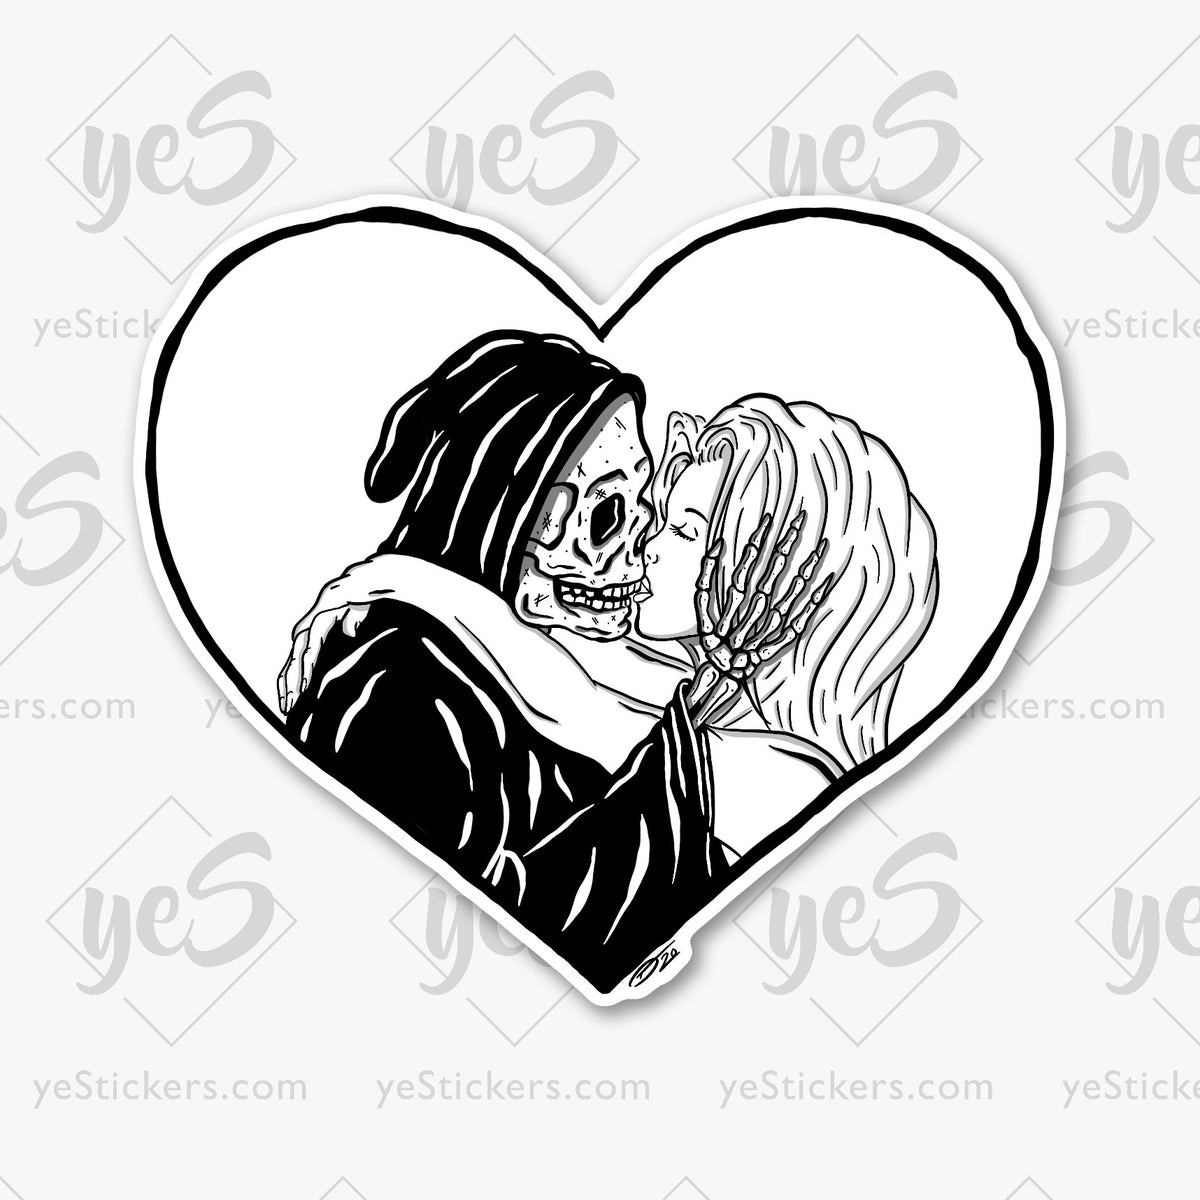 Kiss Of Death Yestickers Com